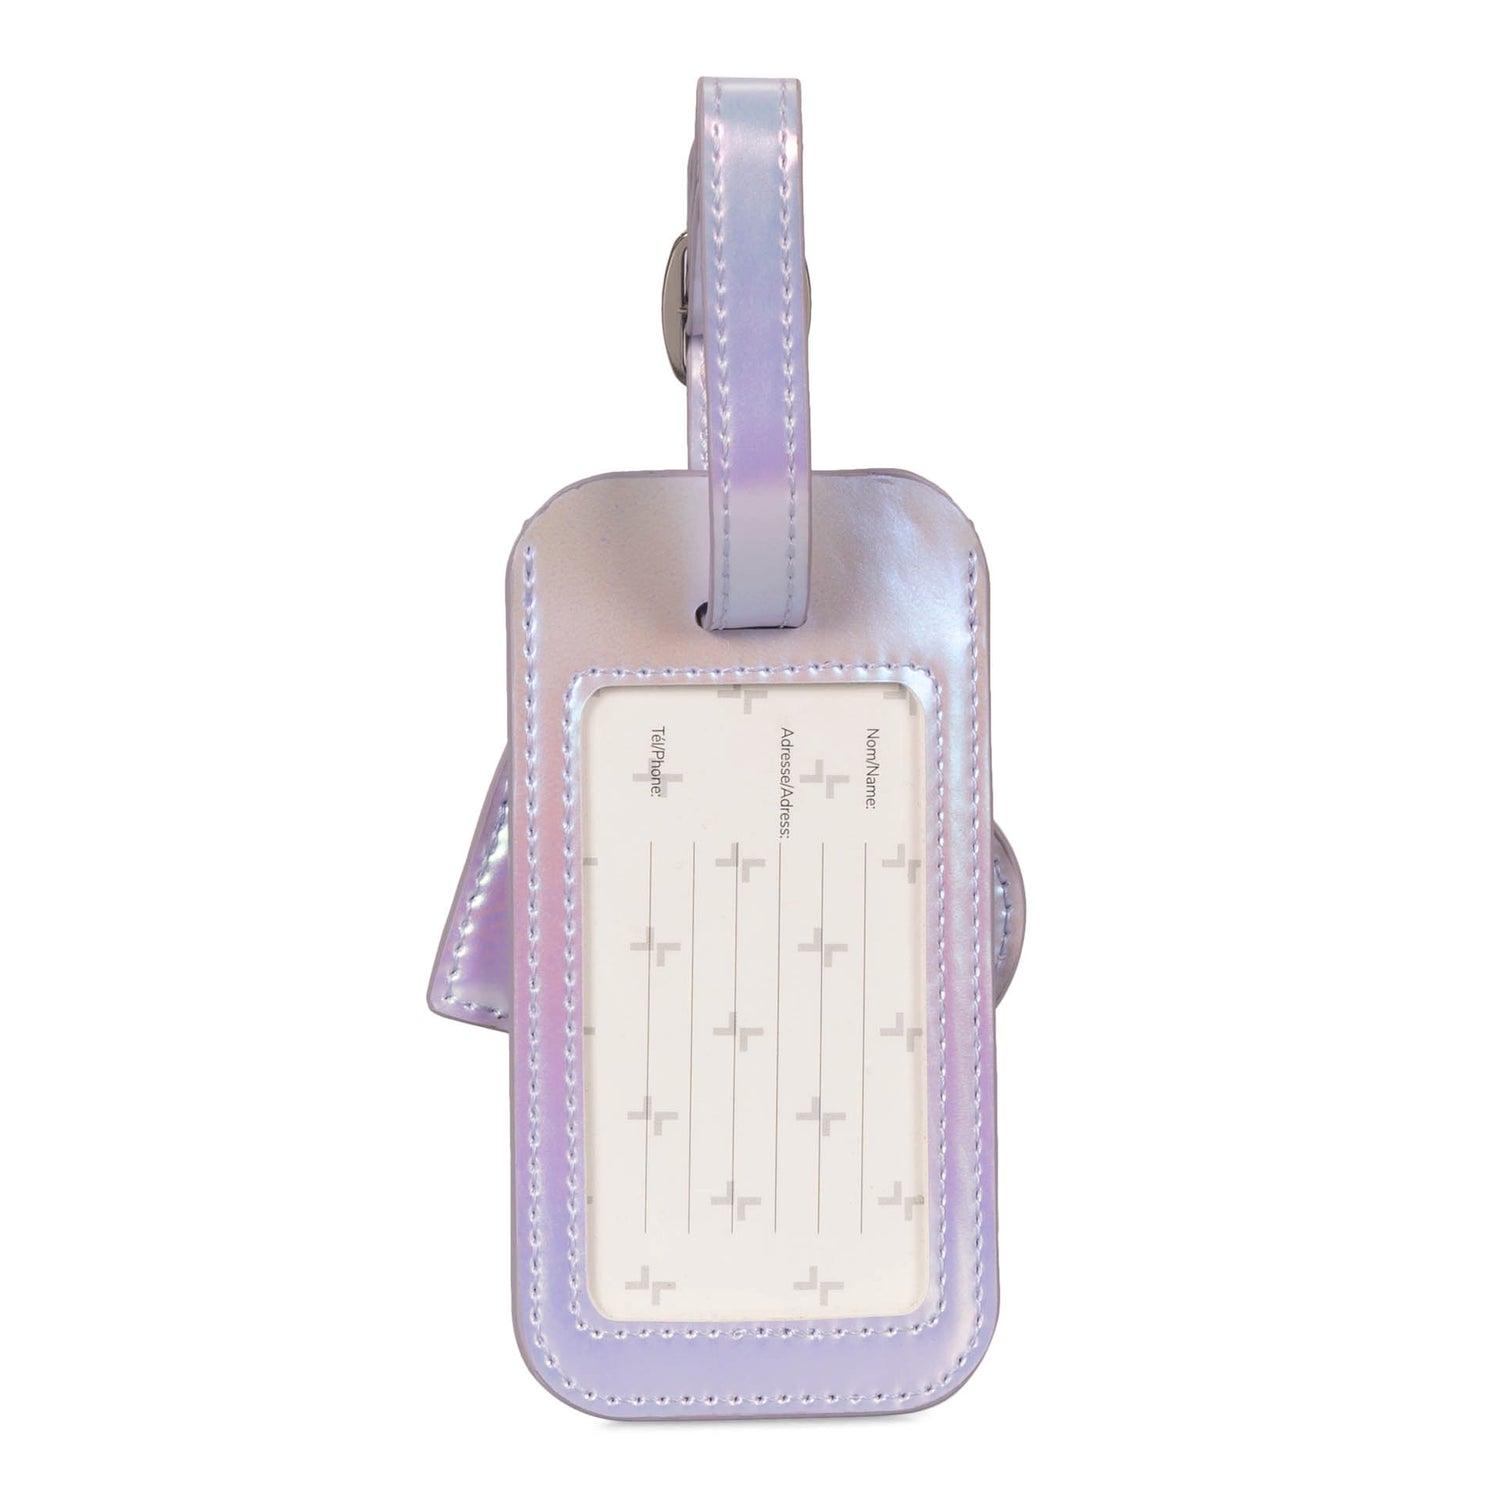 Front side of a purple metallic luggage id tag designed by Tracker showing blank spaces where you would write your name adress and phone # and belt strap.